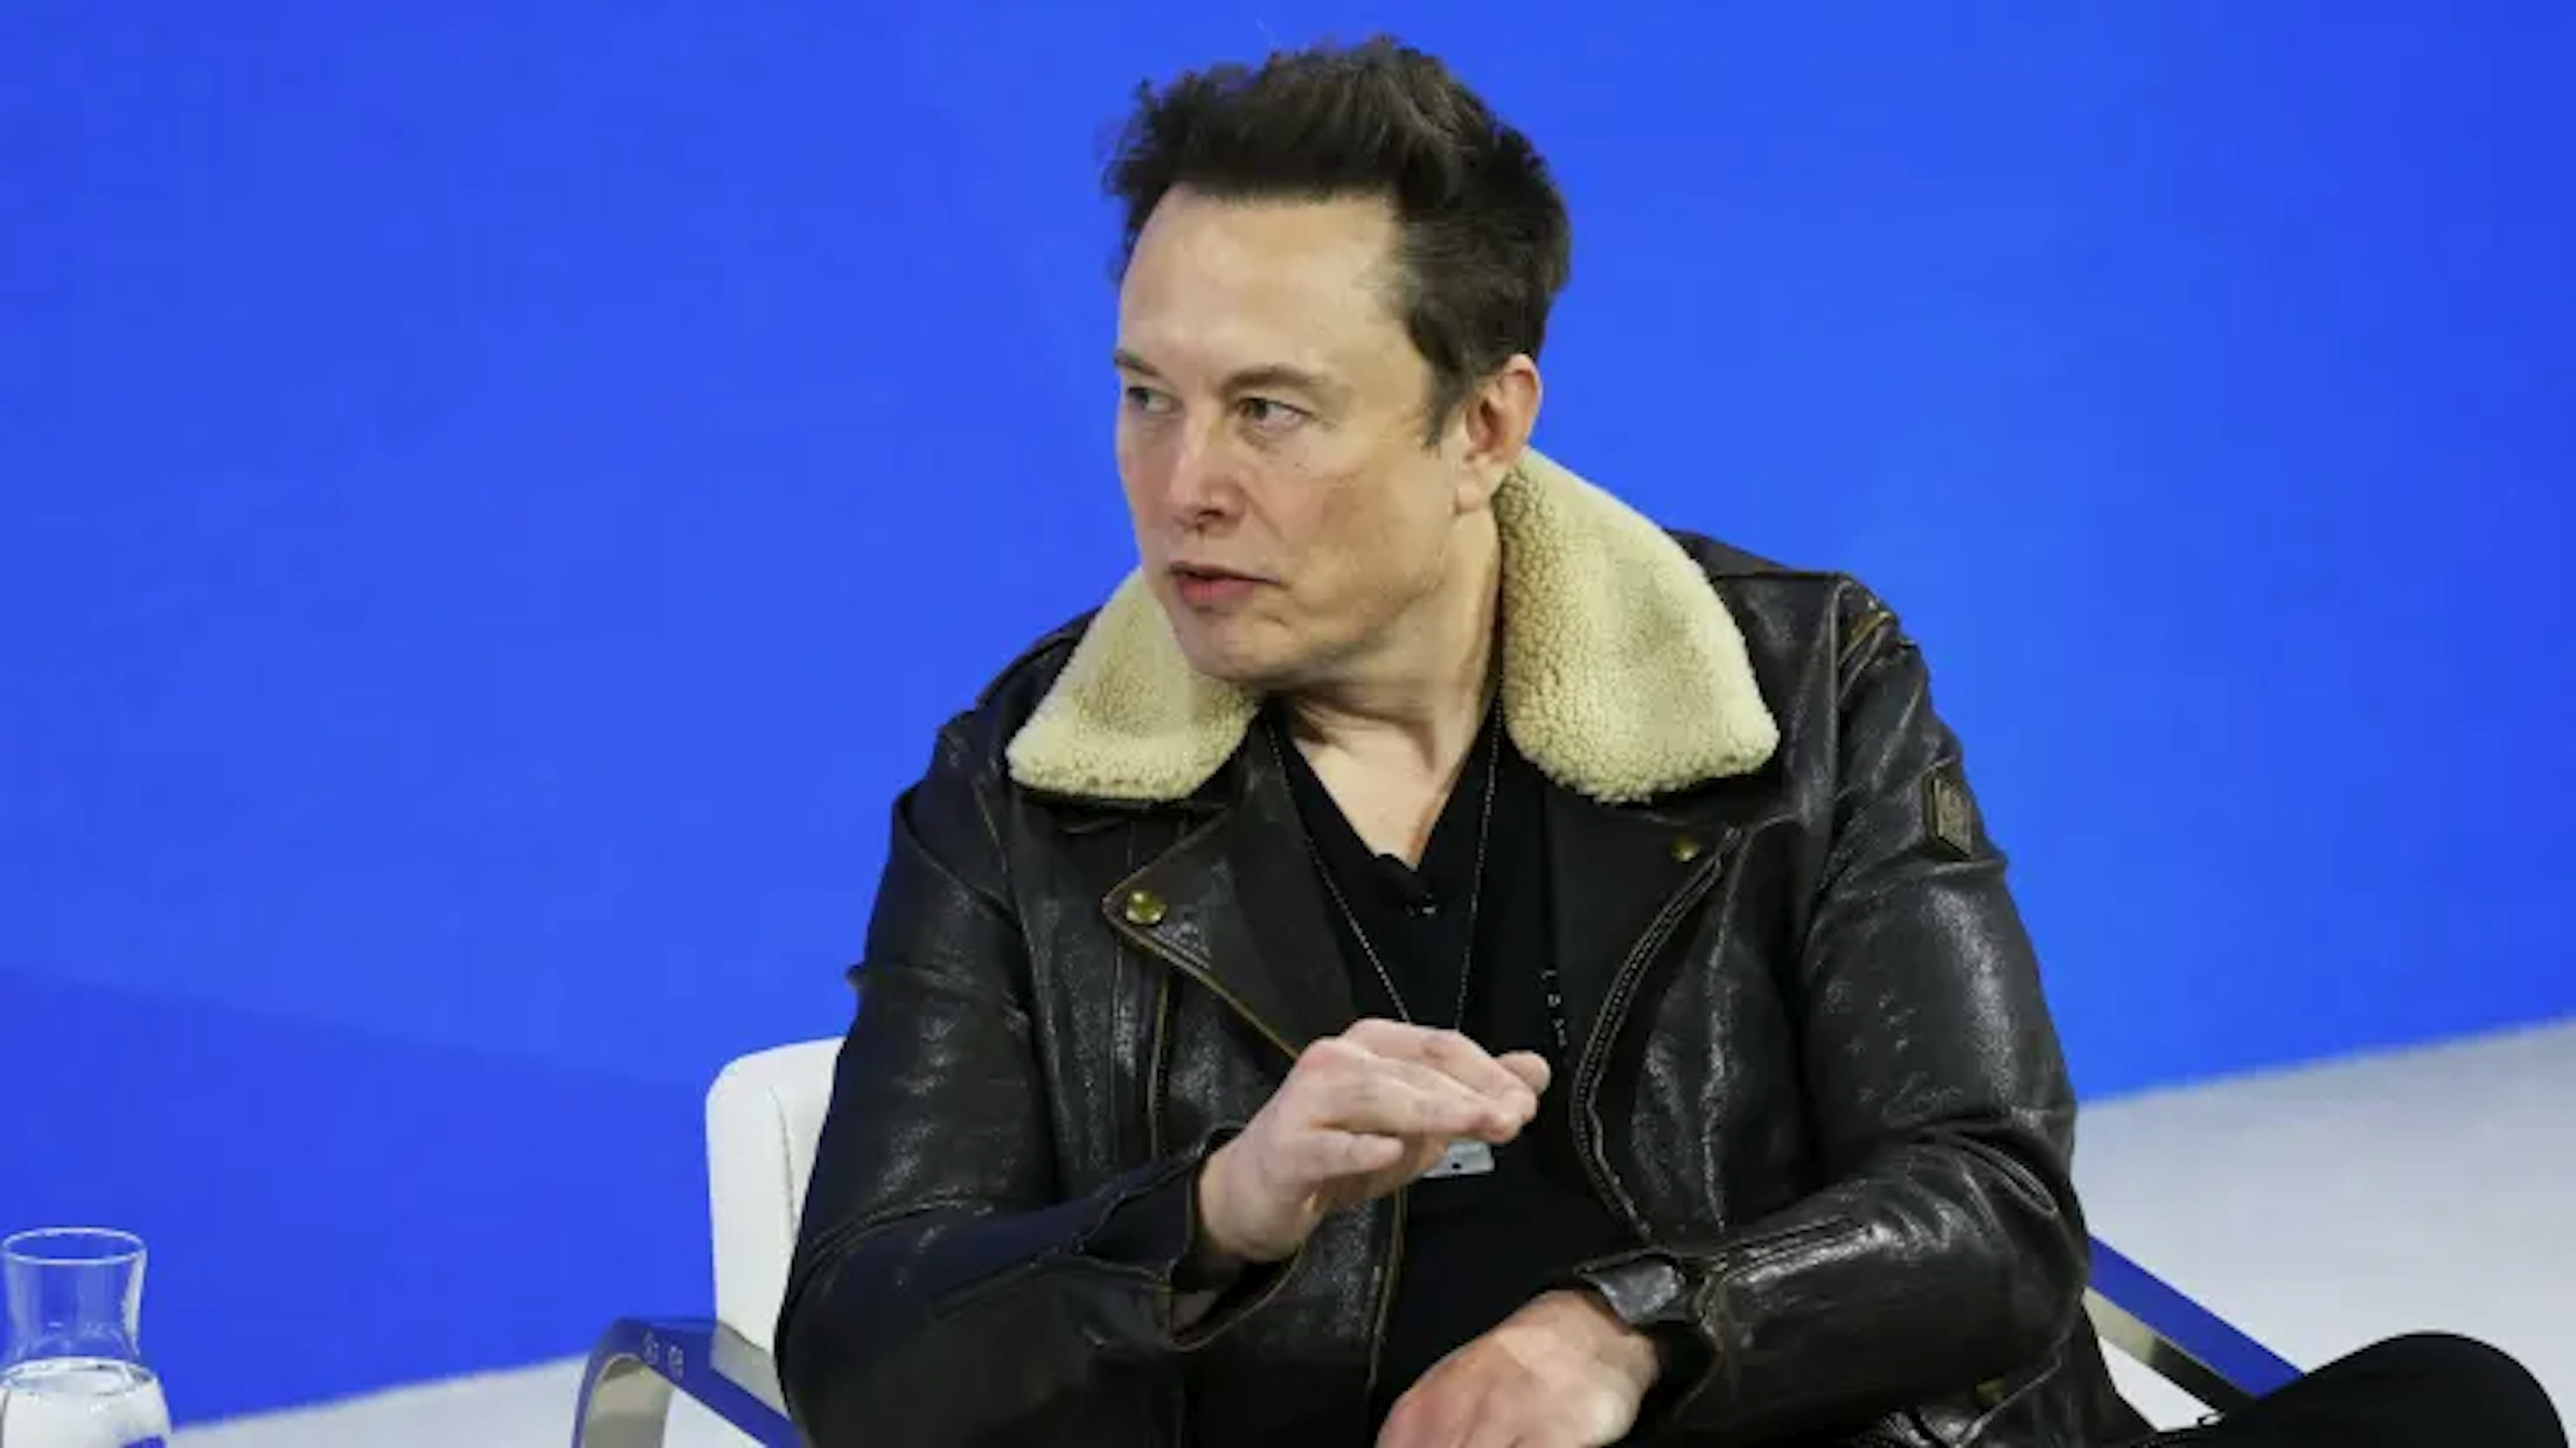 Elon Musk tells advertisers to "Go fuck yourself"